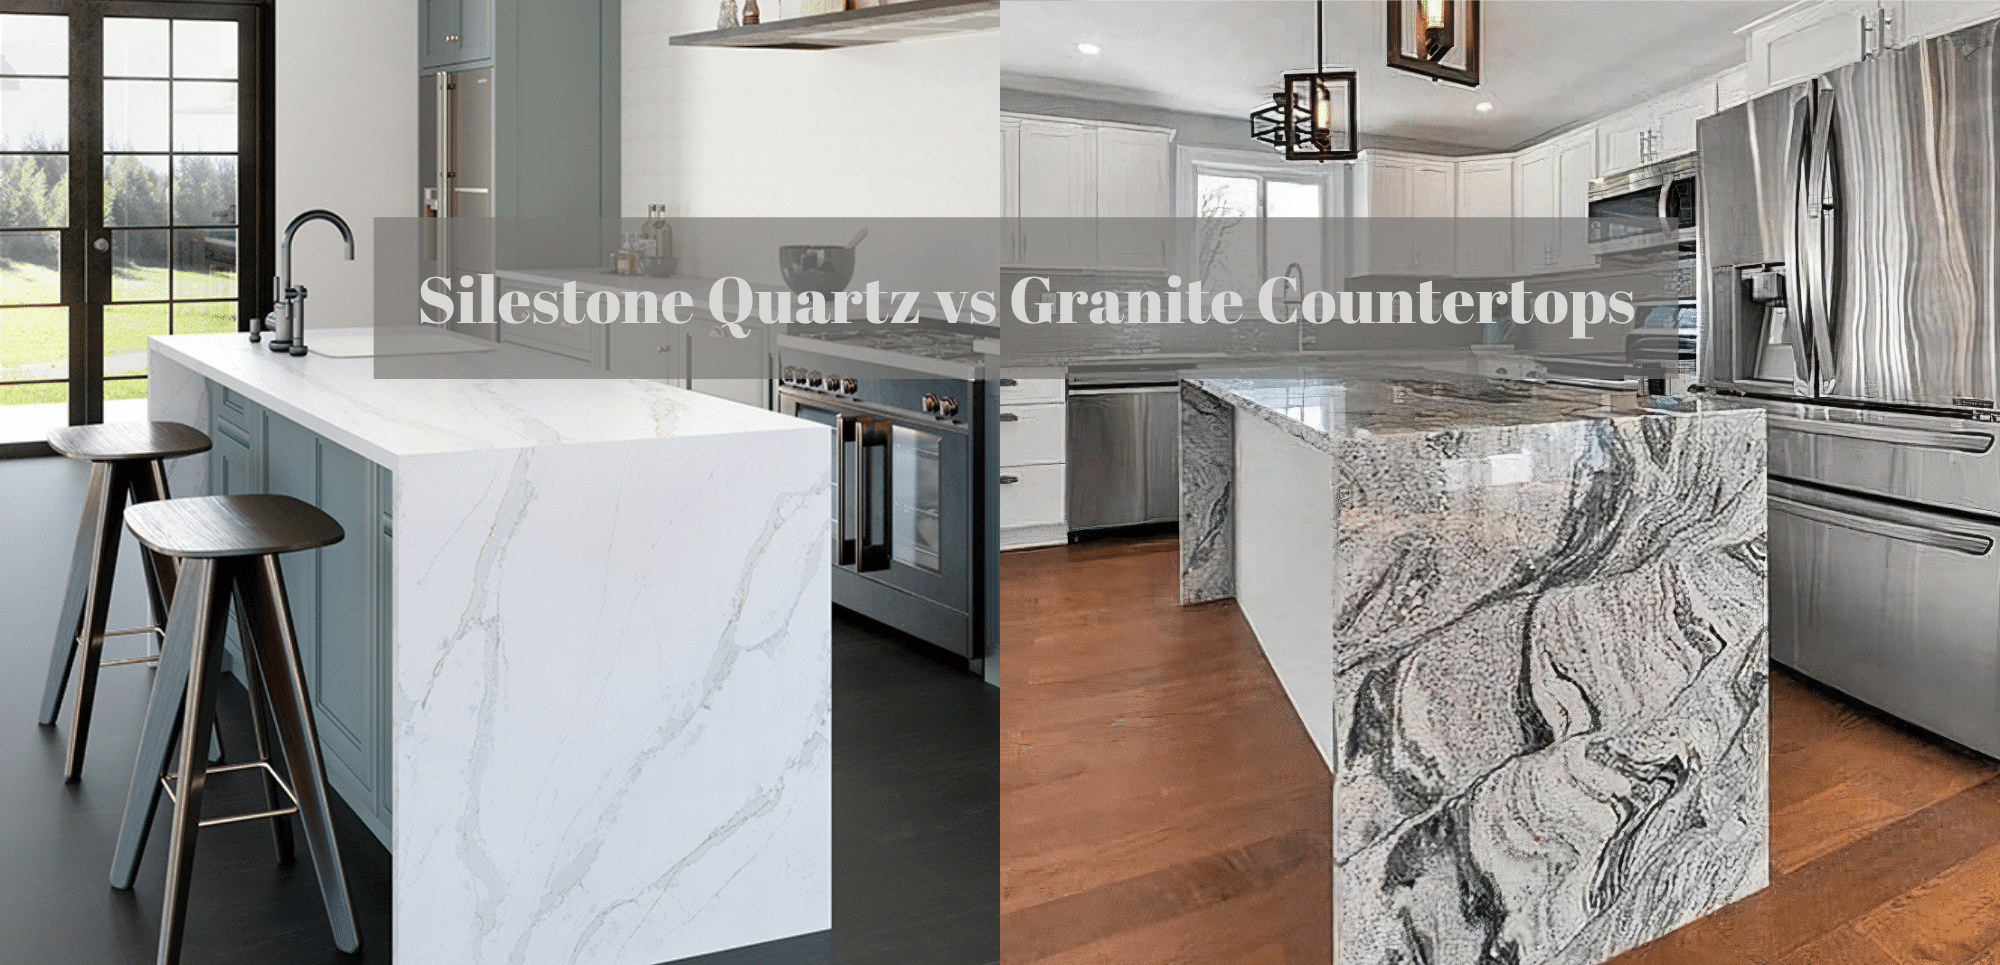 Can You Set Hot Pans on Granite Countertops?